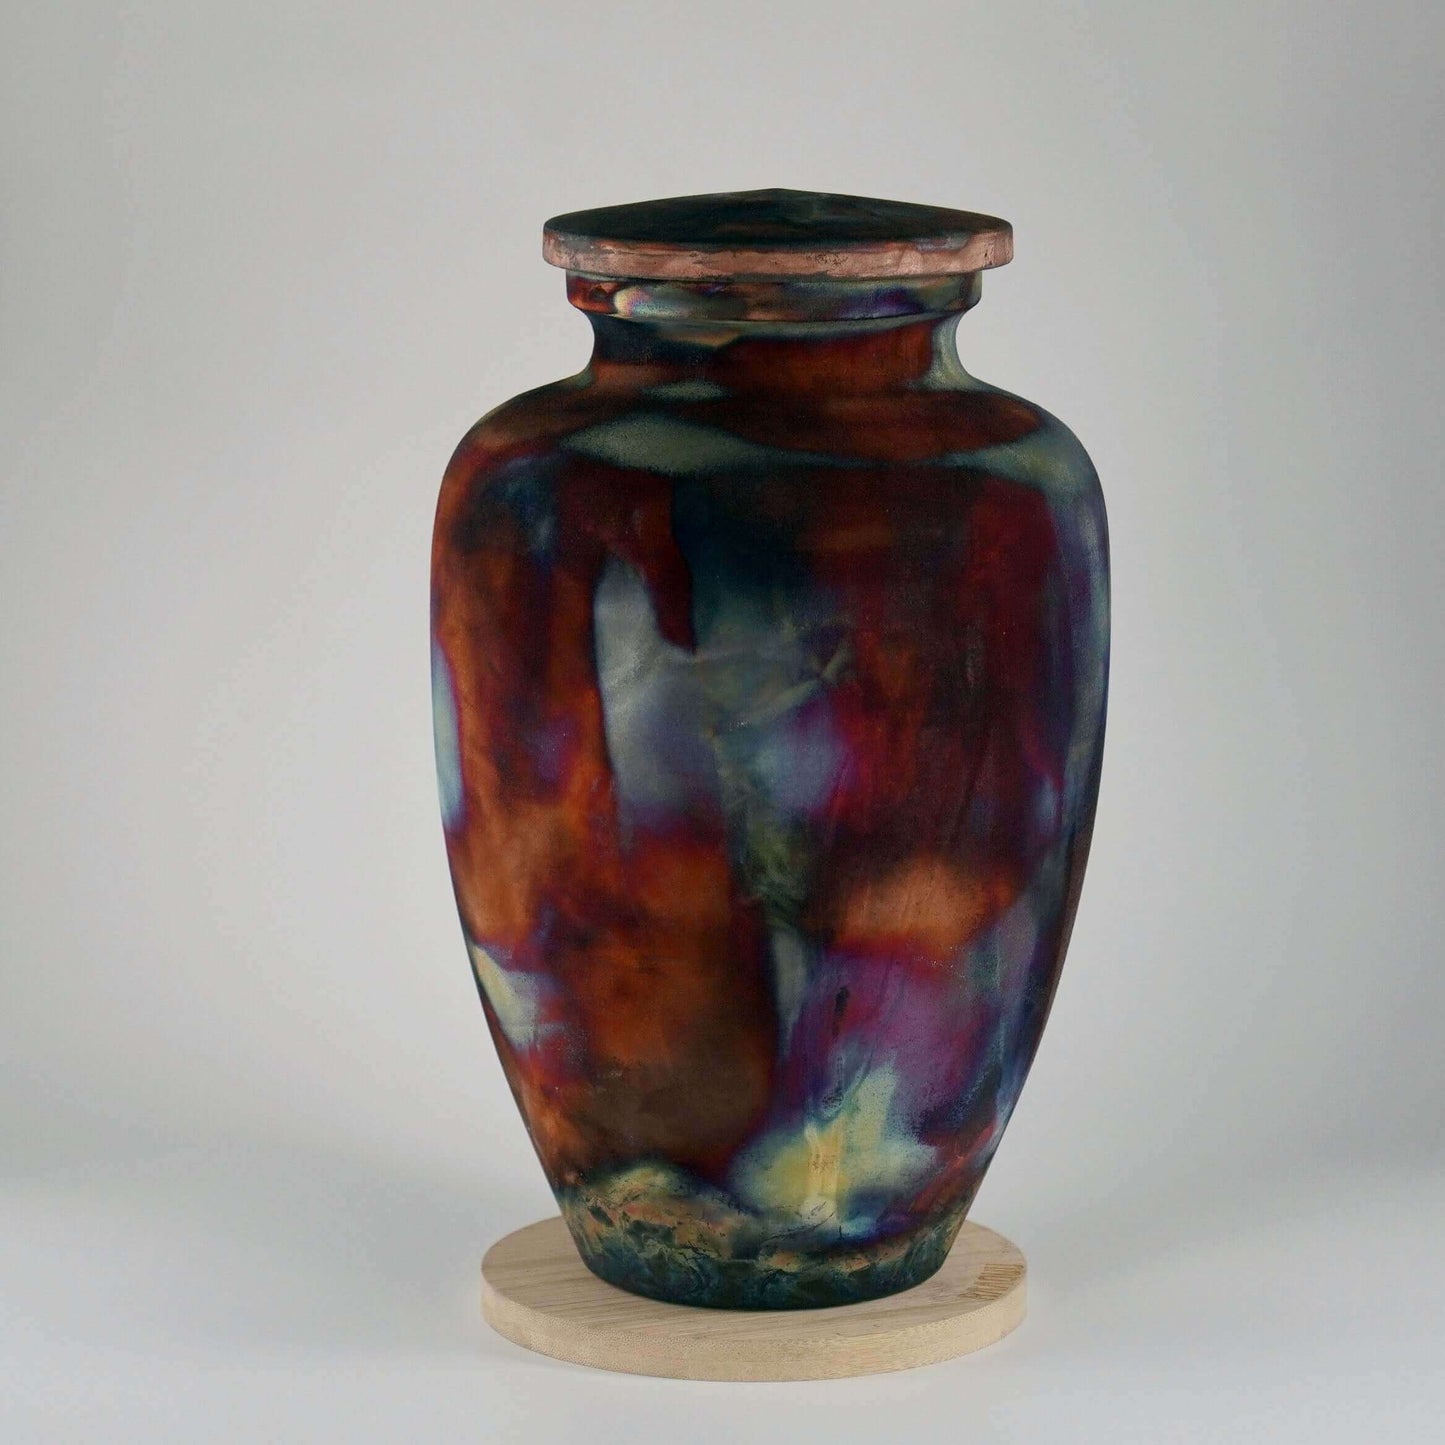 RAAQUU Omoide Ceramic Full Copper Matte Urn for Adult Remains/Ashes S/N80000109 - Raku Pottery 170 cubic inches Unique Handmade Cremation Vessel